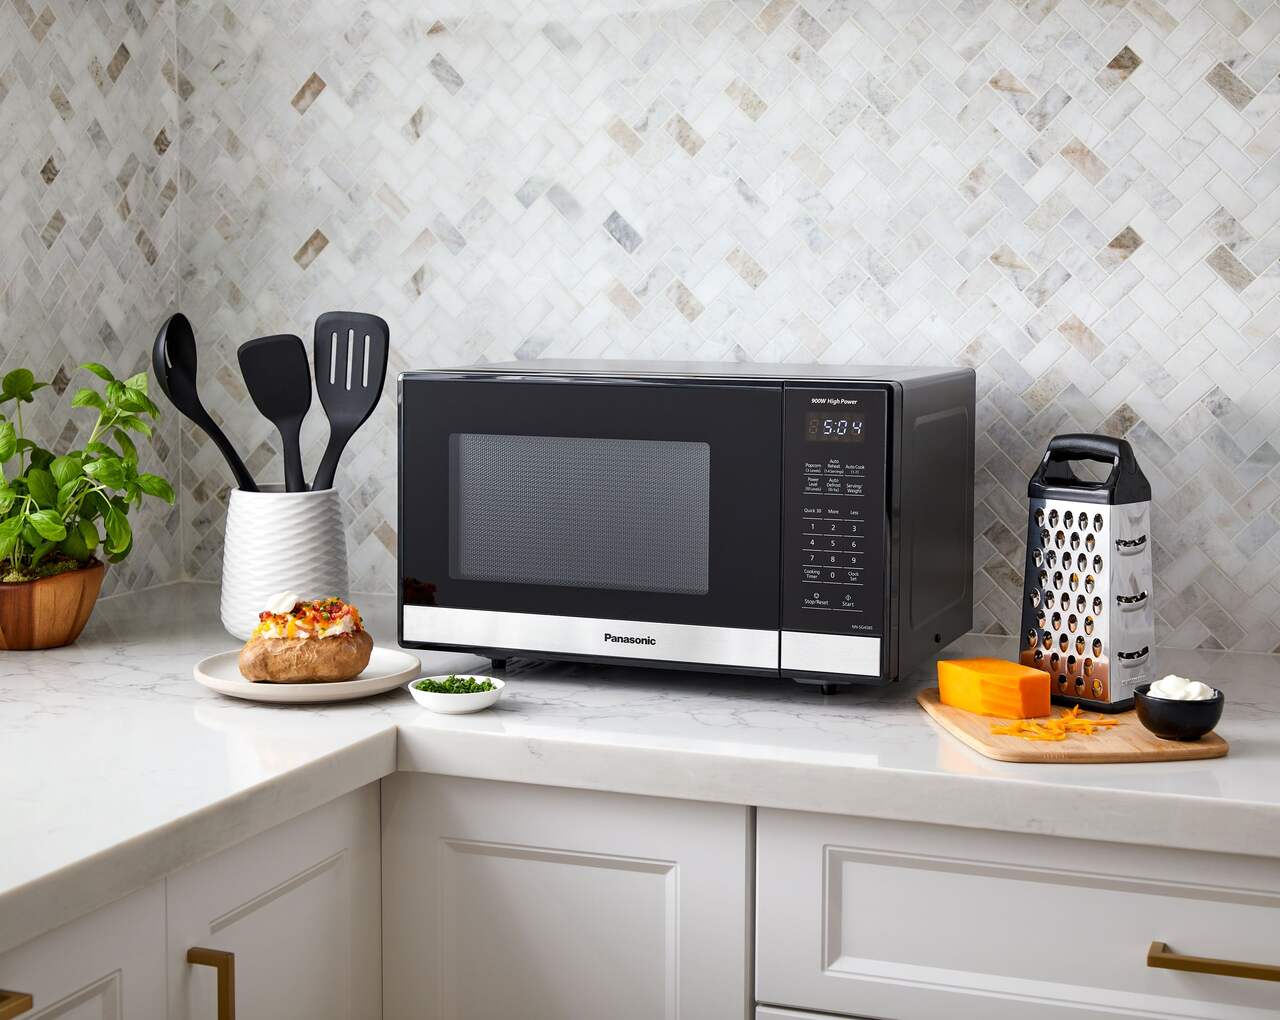 Kenmore Countertop Microwave Oven, 6 Preset Cooking Programs, 0.9 Cu Ft,  900w, Stainless Steel